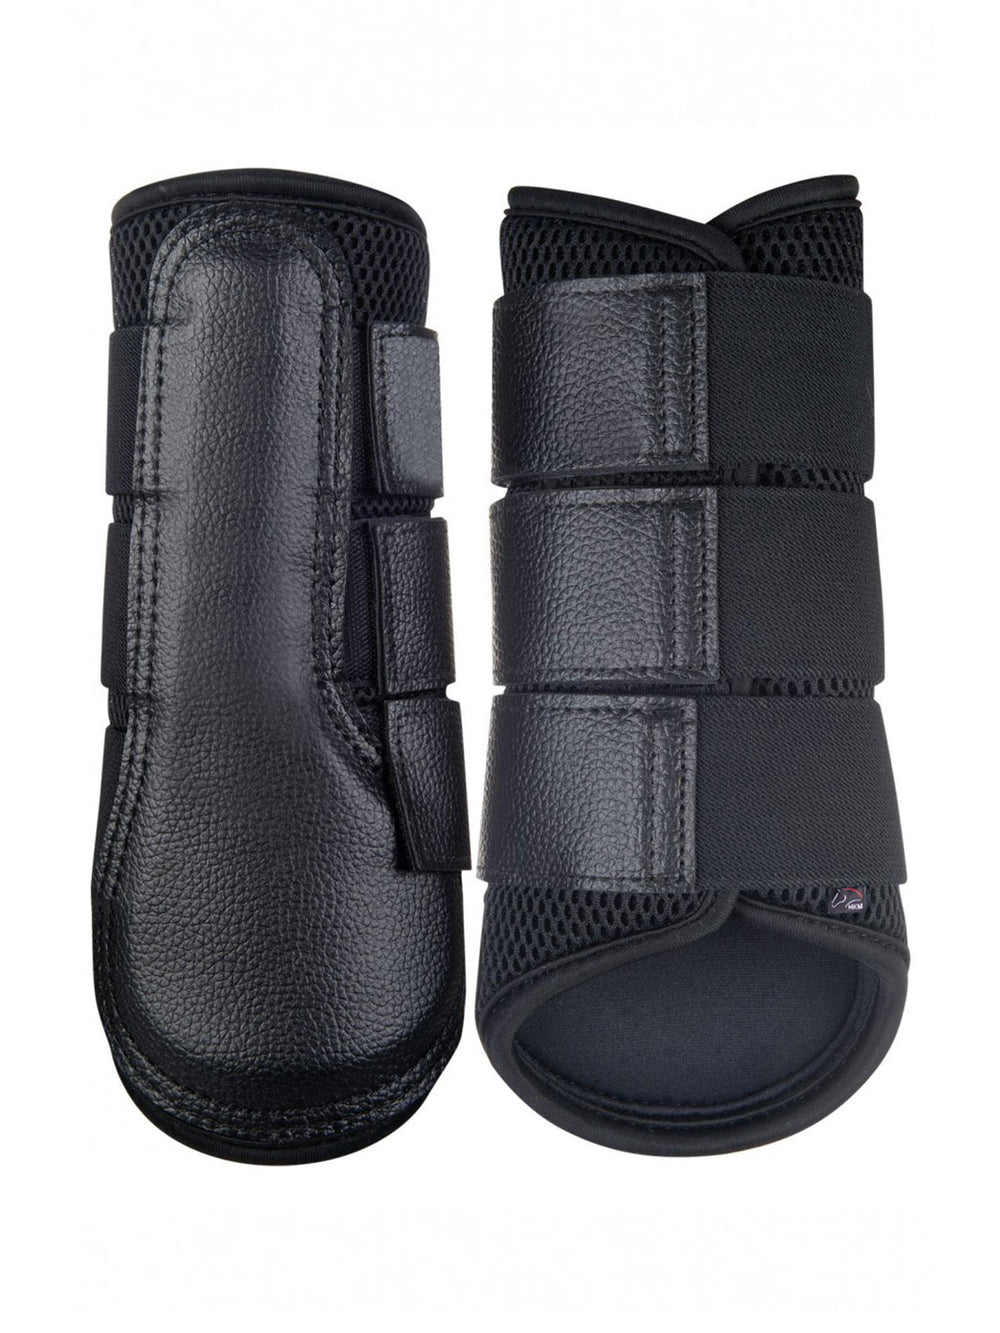 HKM Protection Breathe Boots